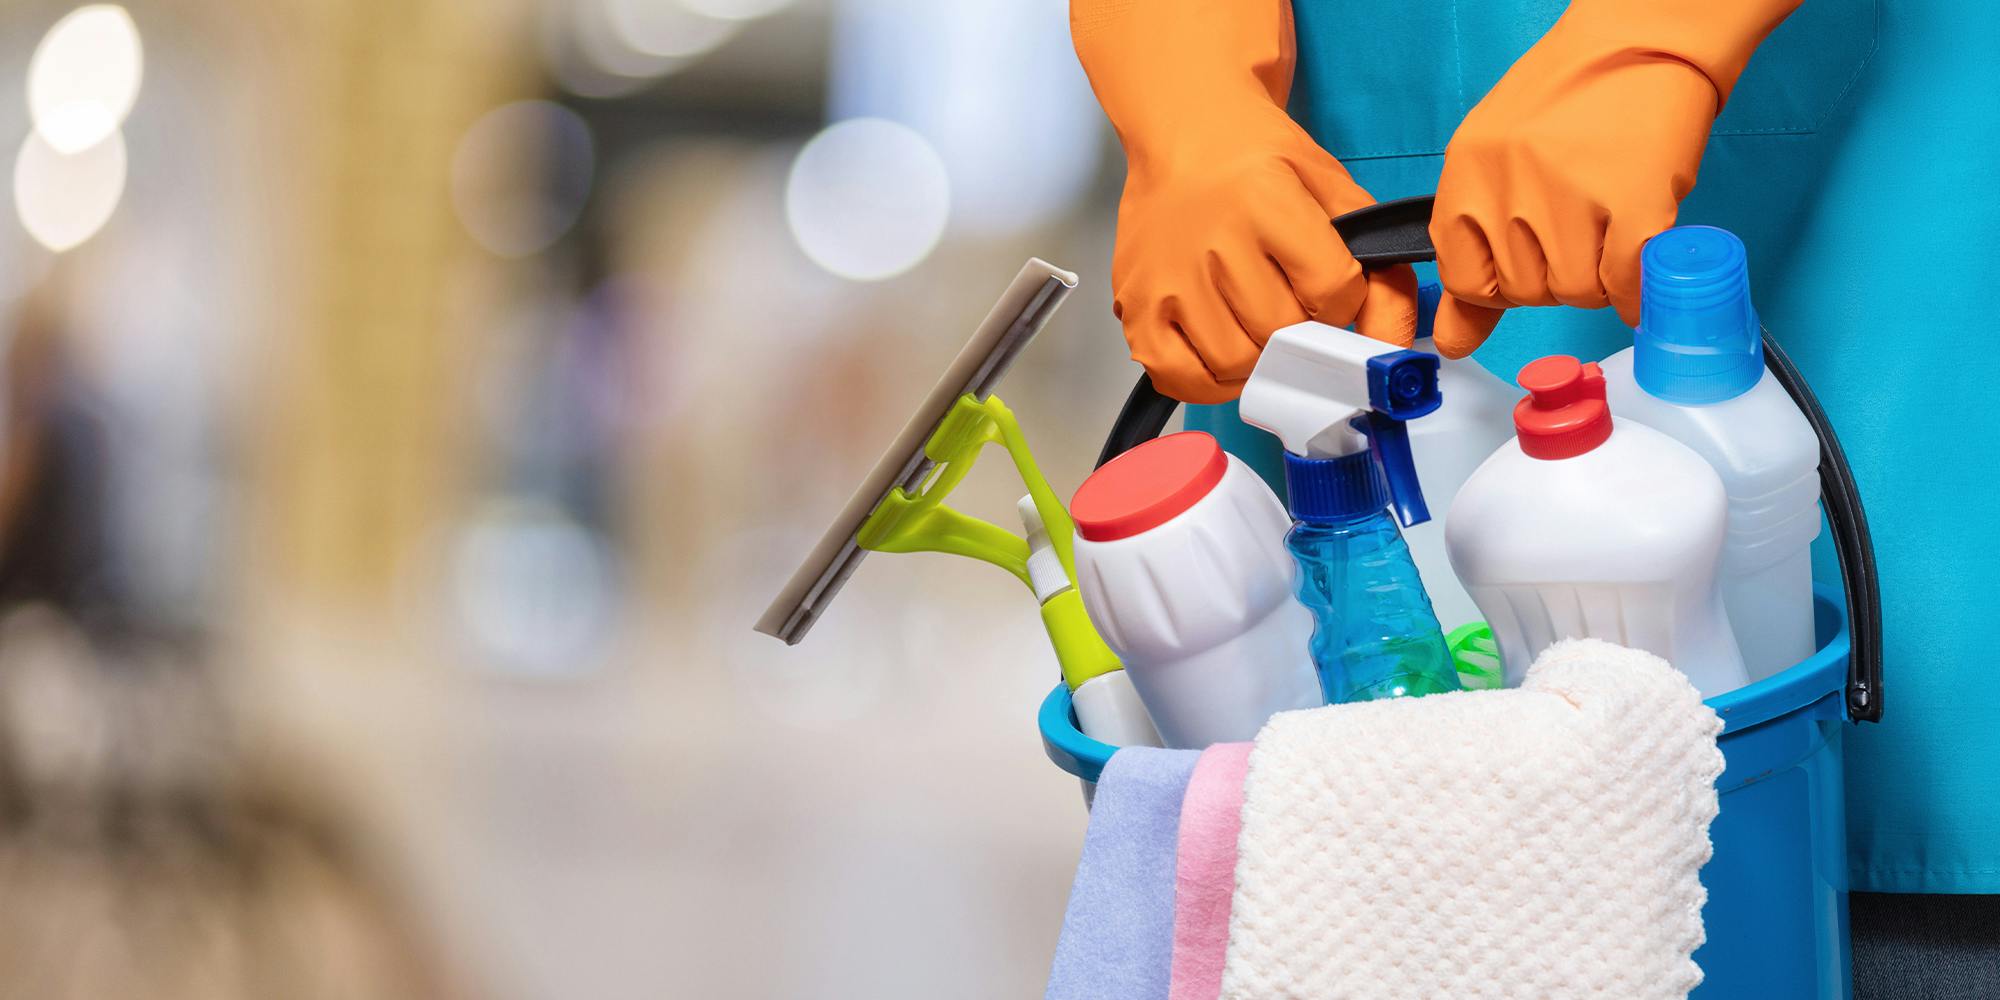 A bucket of cleaning products in hands with rubber gloves on a blurred background.